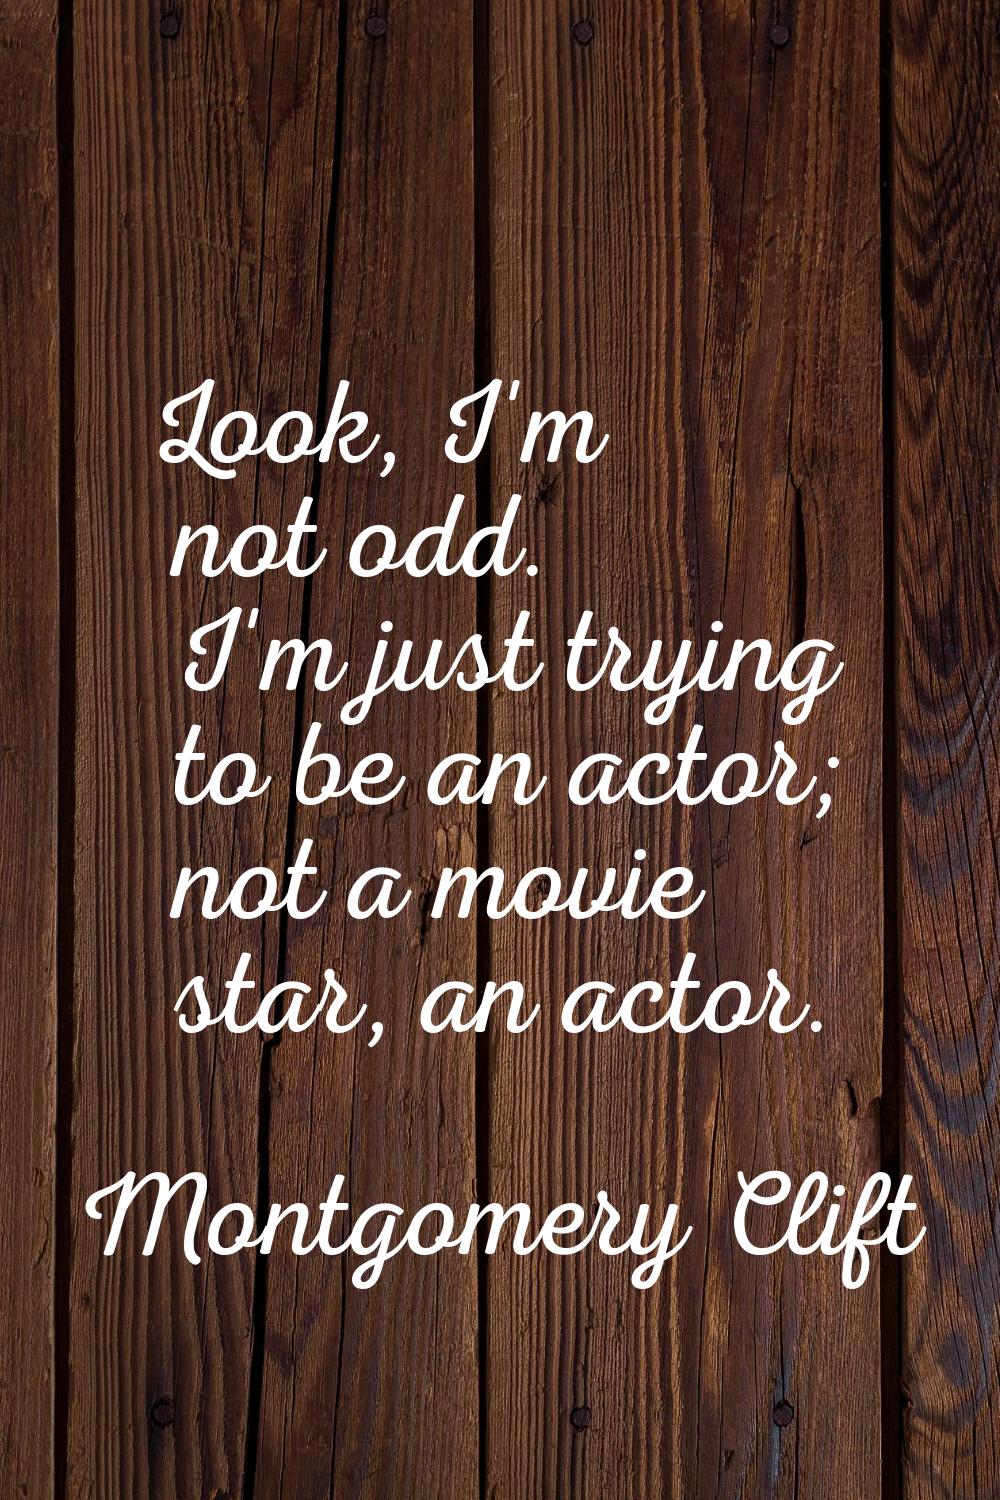 Look, I'm not odd. I'm just trying to be an actor; not a movie star, an actor.